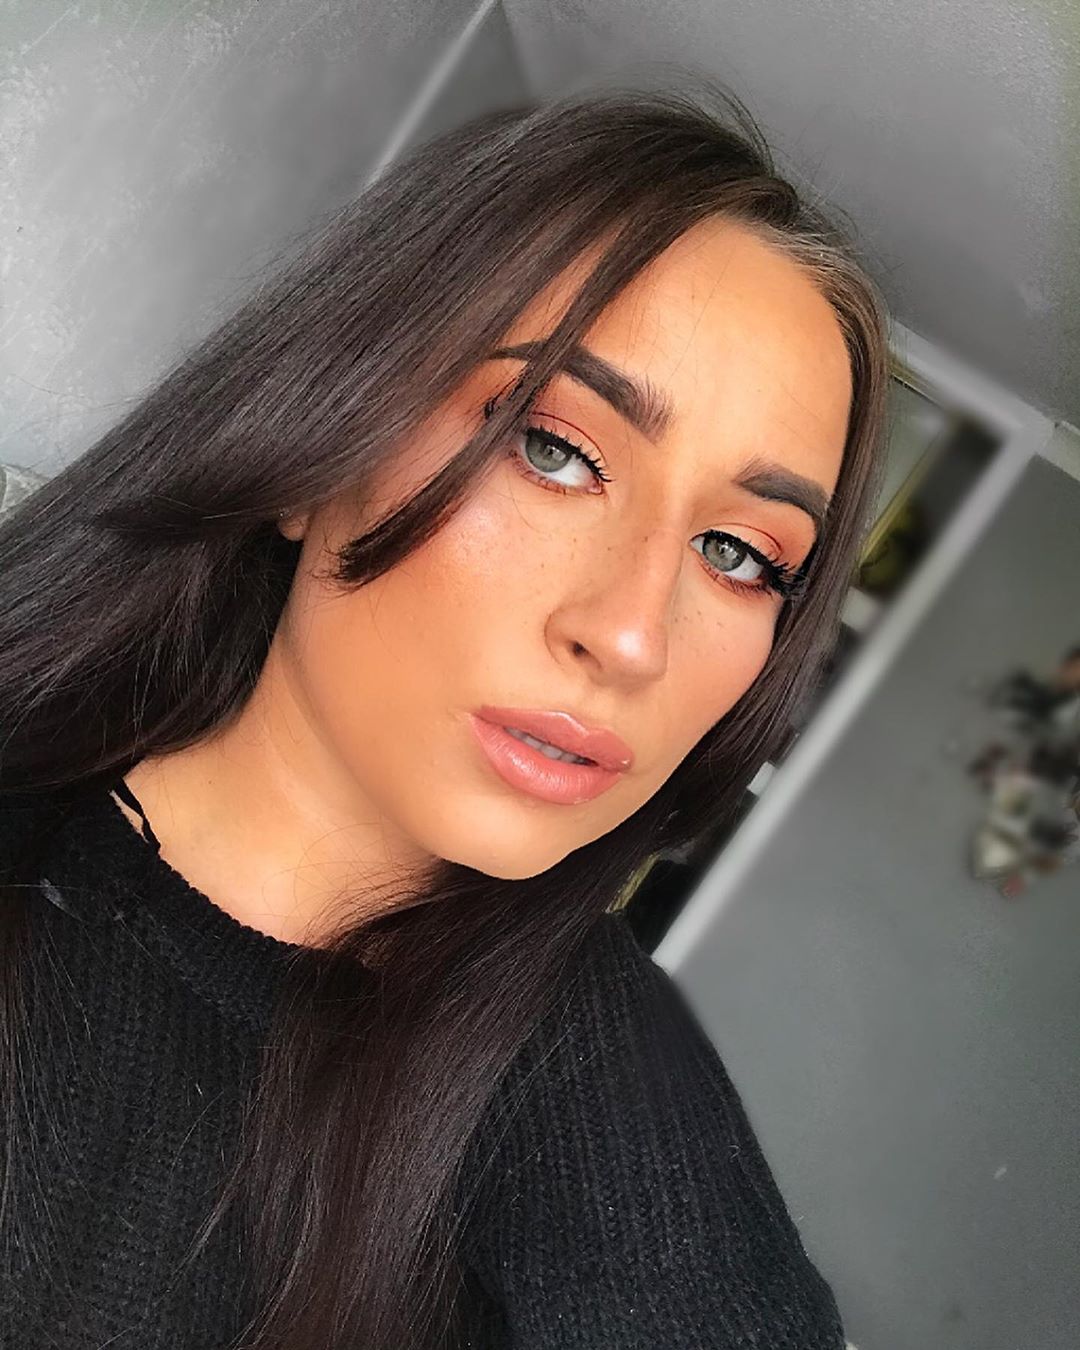 Faux Freckles Look using highlight on cheeks